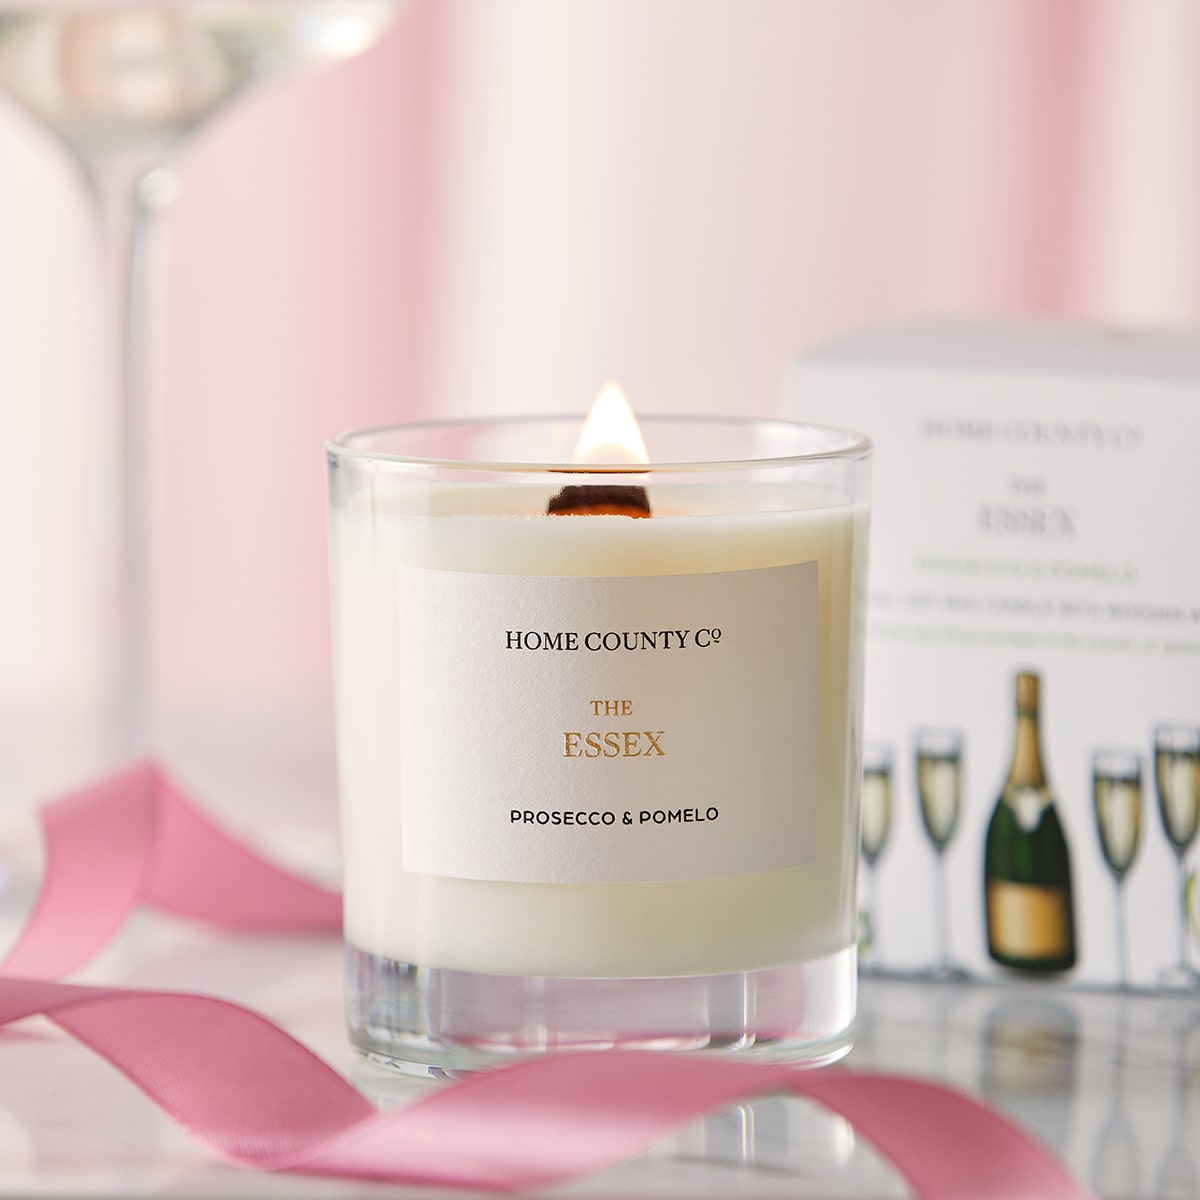 A Prosecco and Pomelo scented candle from the Home County Co is shown alight next to the illustrated candle packaging